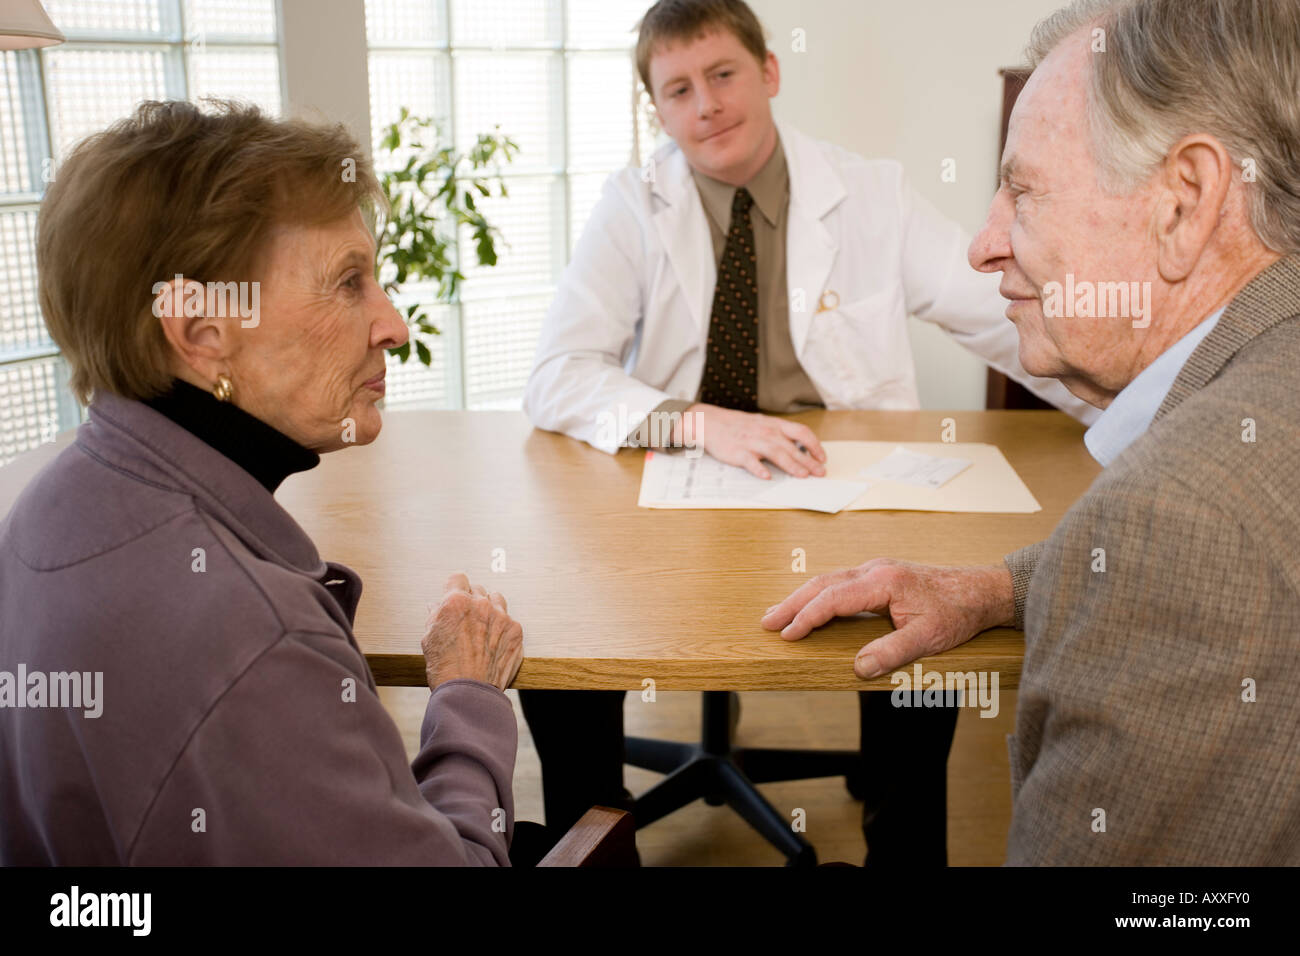 Male patient consults with his doctor (psychiatrist, psychologist,surgeon or primary care physician) as his wife looks on. Stock Photo